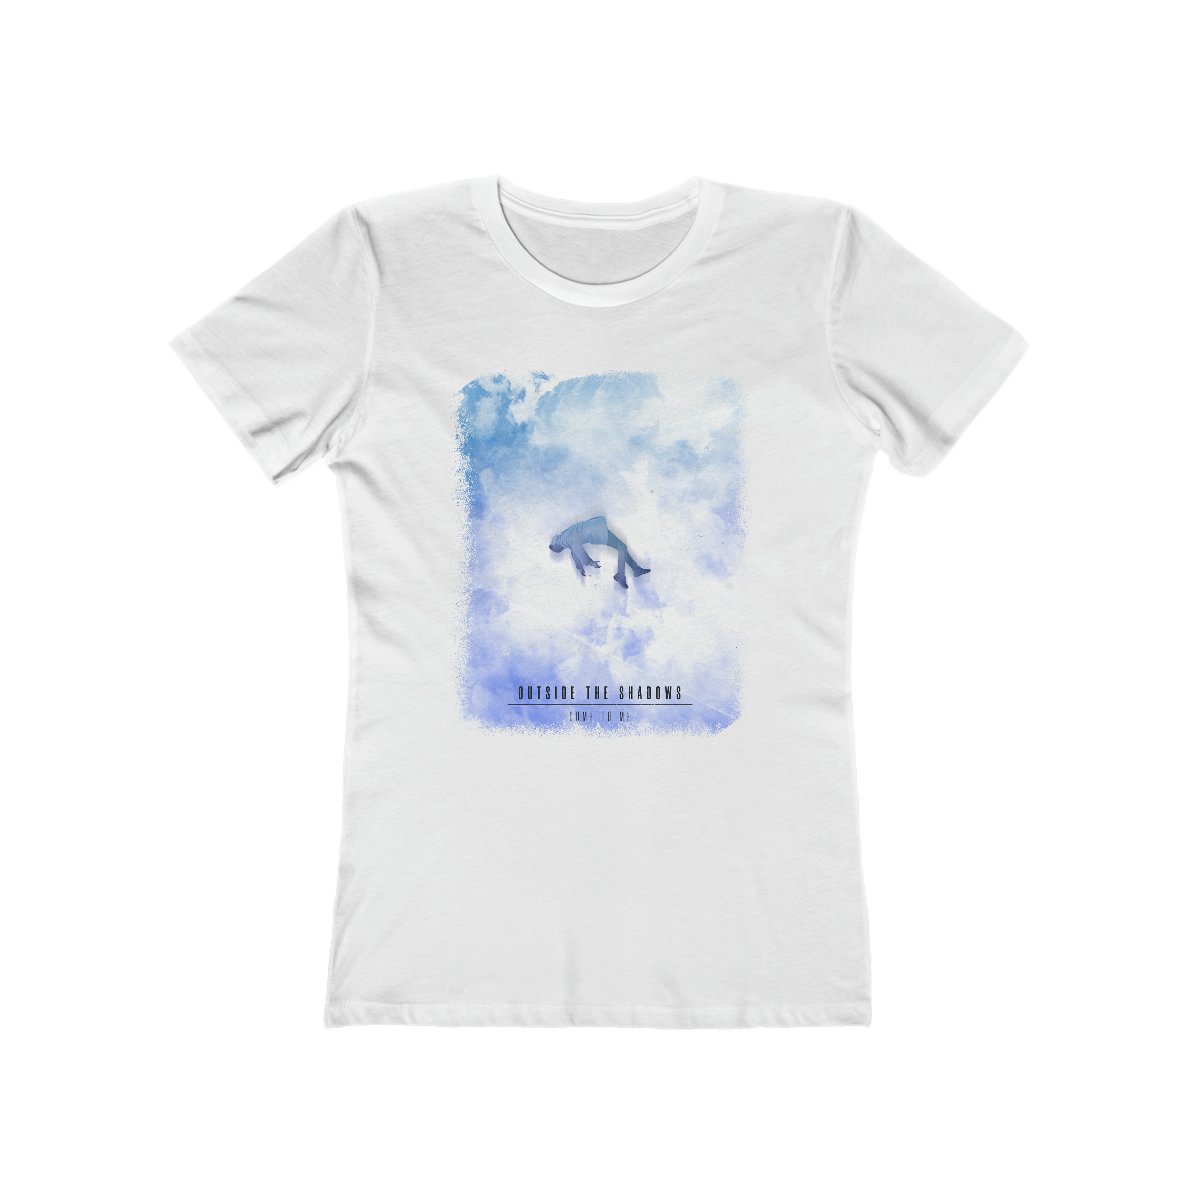 Outside the Shadows – Come To Me BL Women’s Tshirt